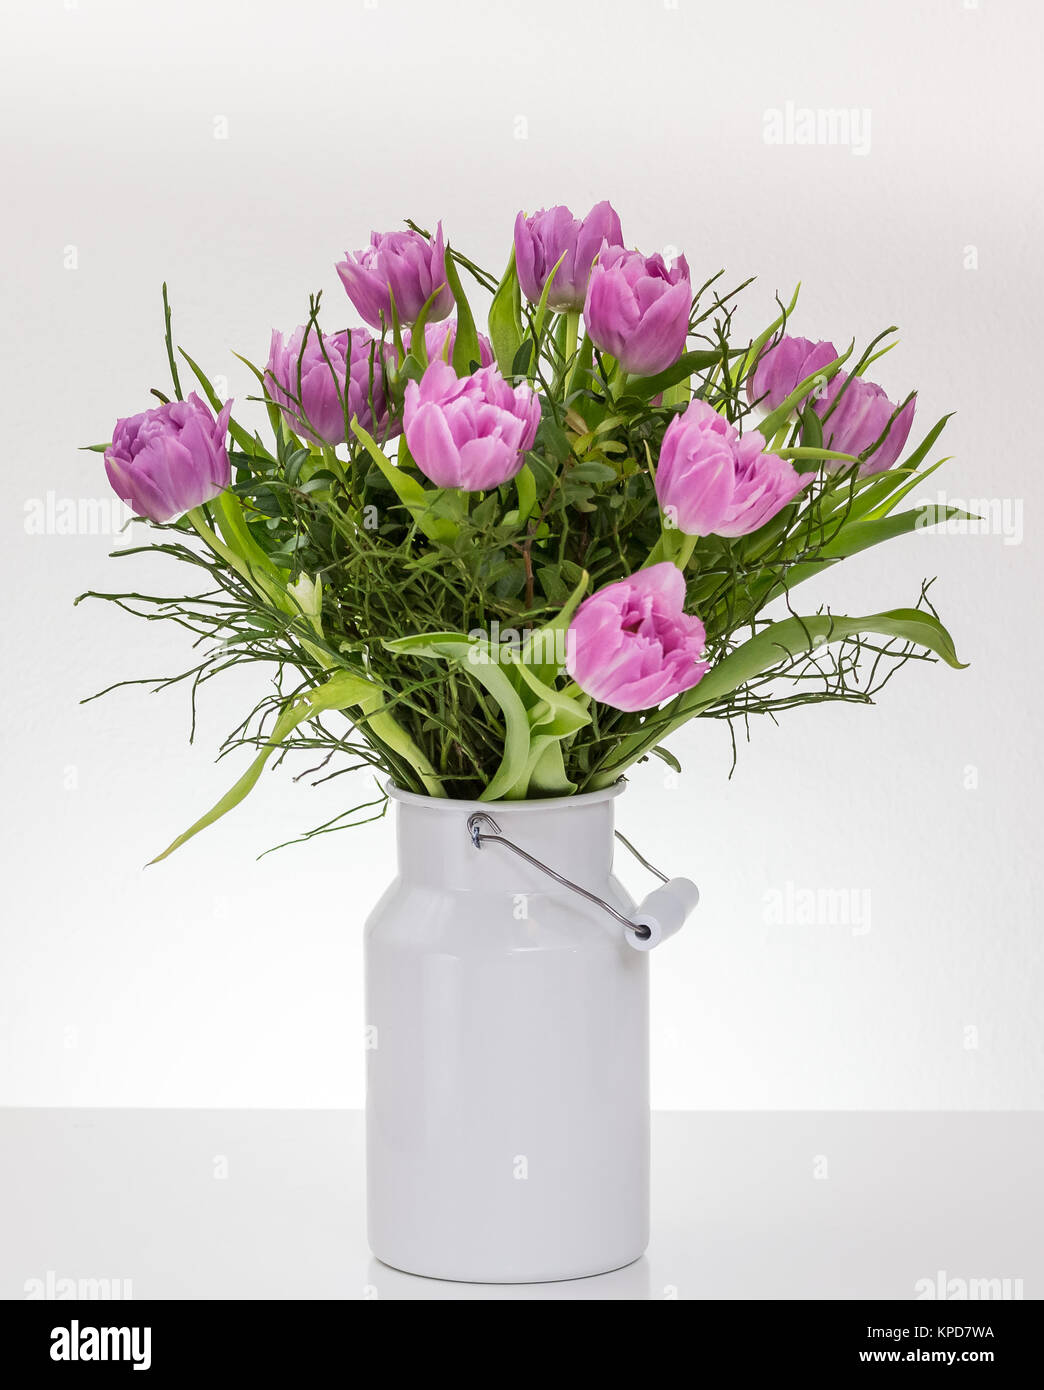 Pink,purple tulips in a white milk jug against a white background Stock Photo